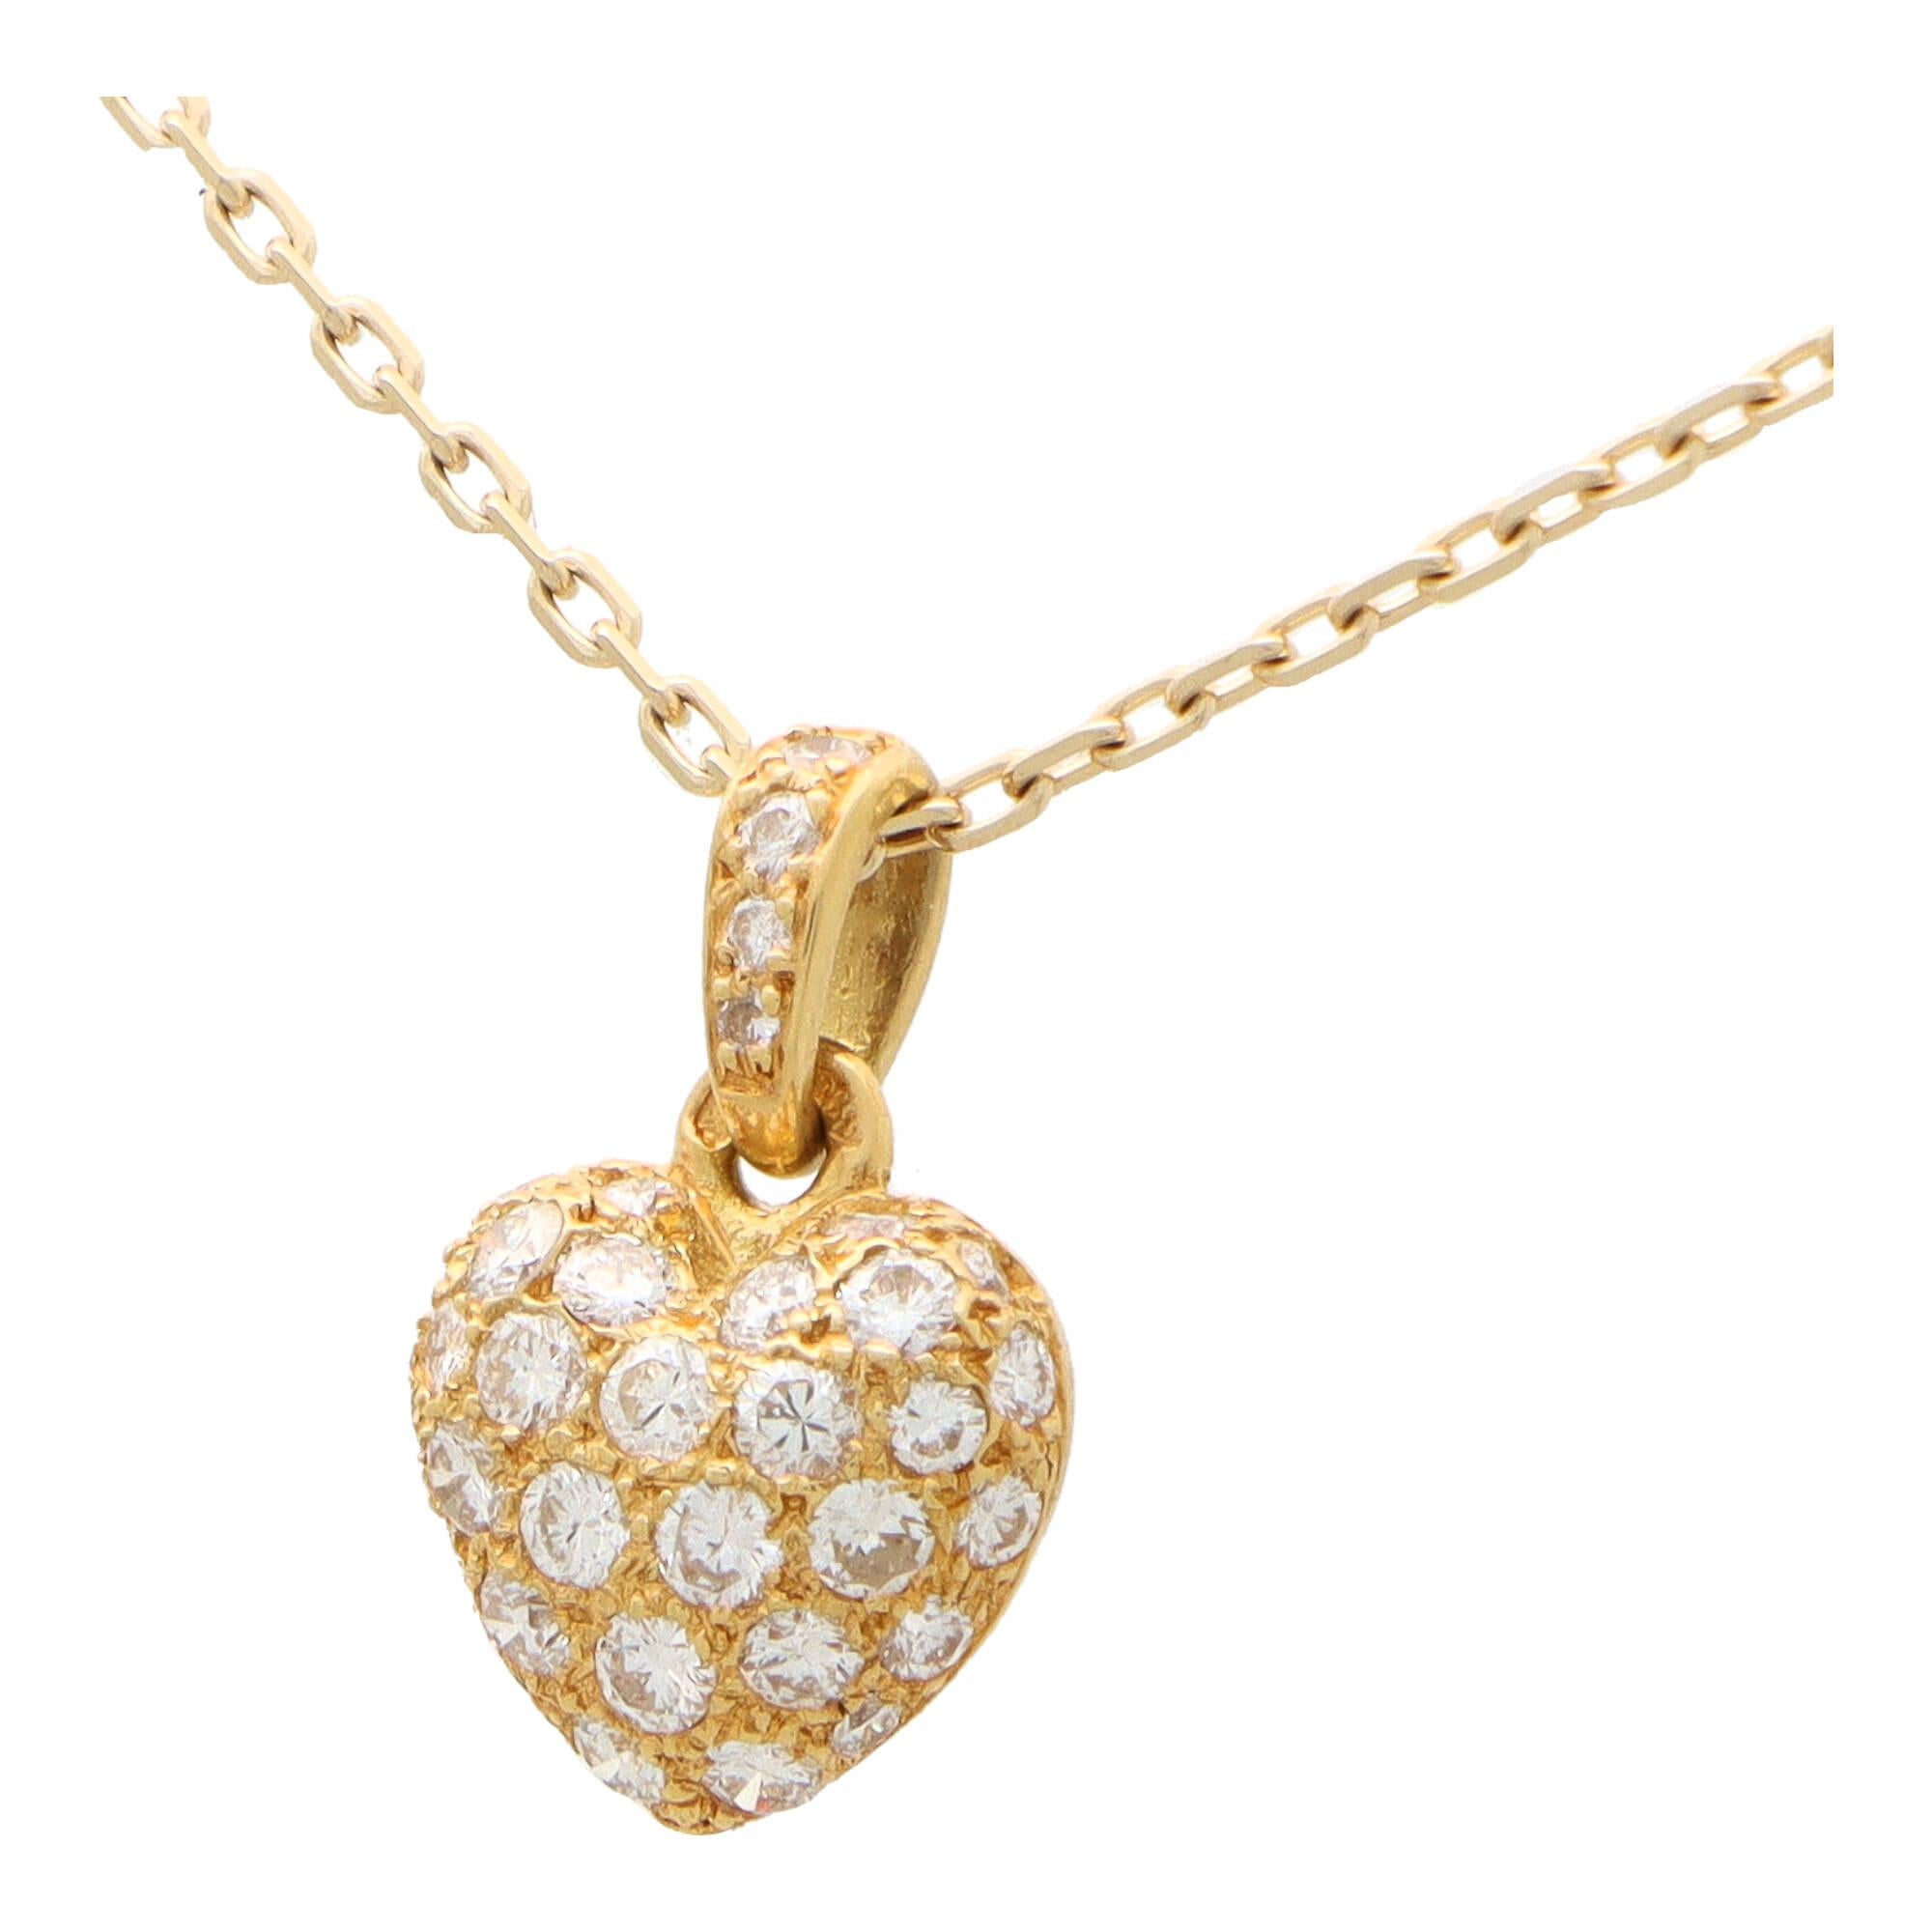 Vintage Cartier Diamond Heart Pendant Necklace in 18k Yellow Gold In Excellent Condition For Sale In London, GB